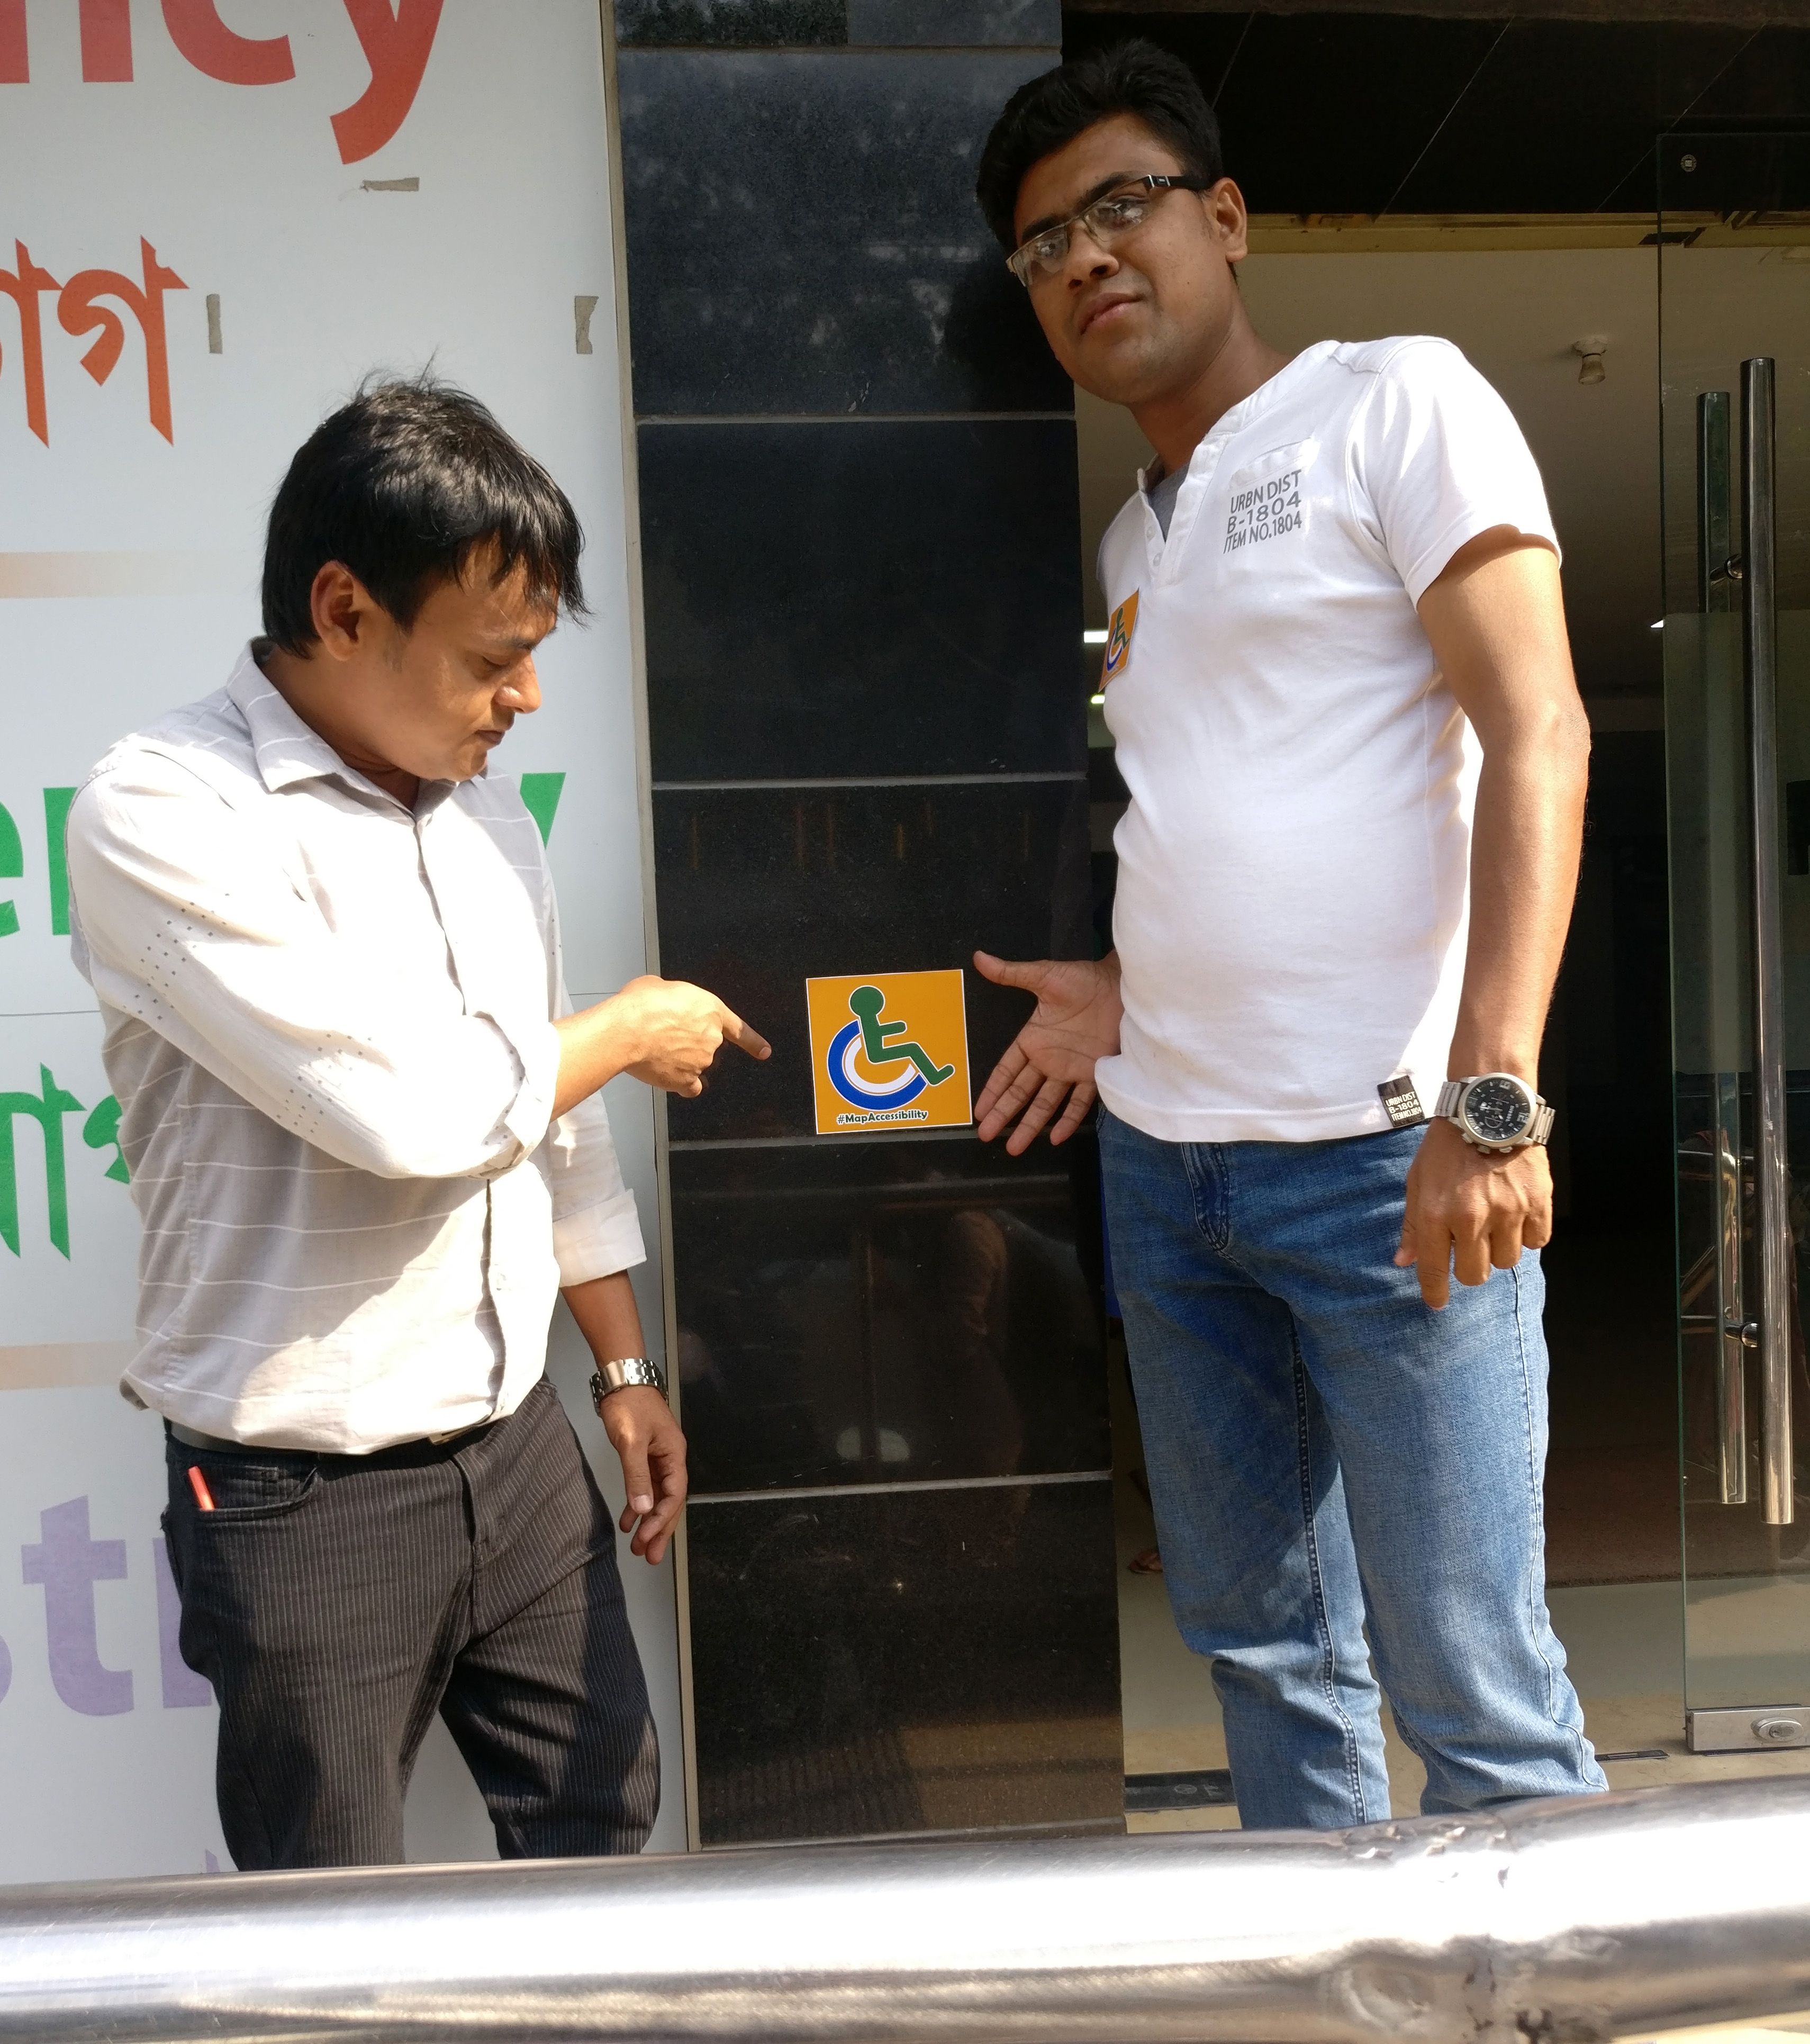 We marked some places with Accessibility sign ... Local Guides @MohammadAlauddin  & @BDmafuz showing us the accessibility sign